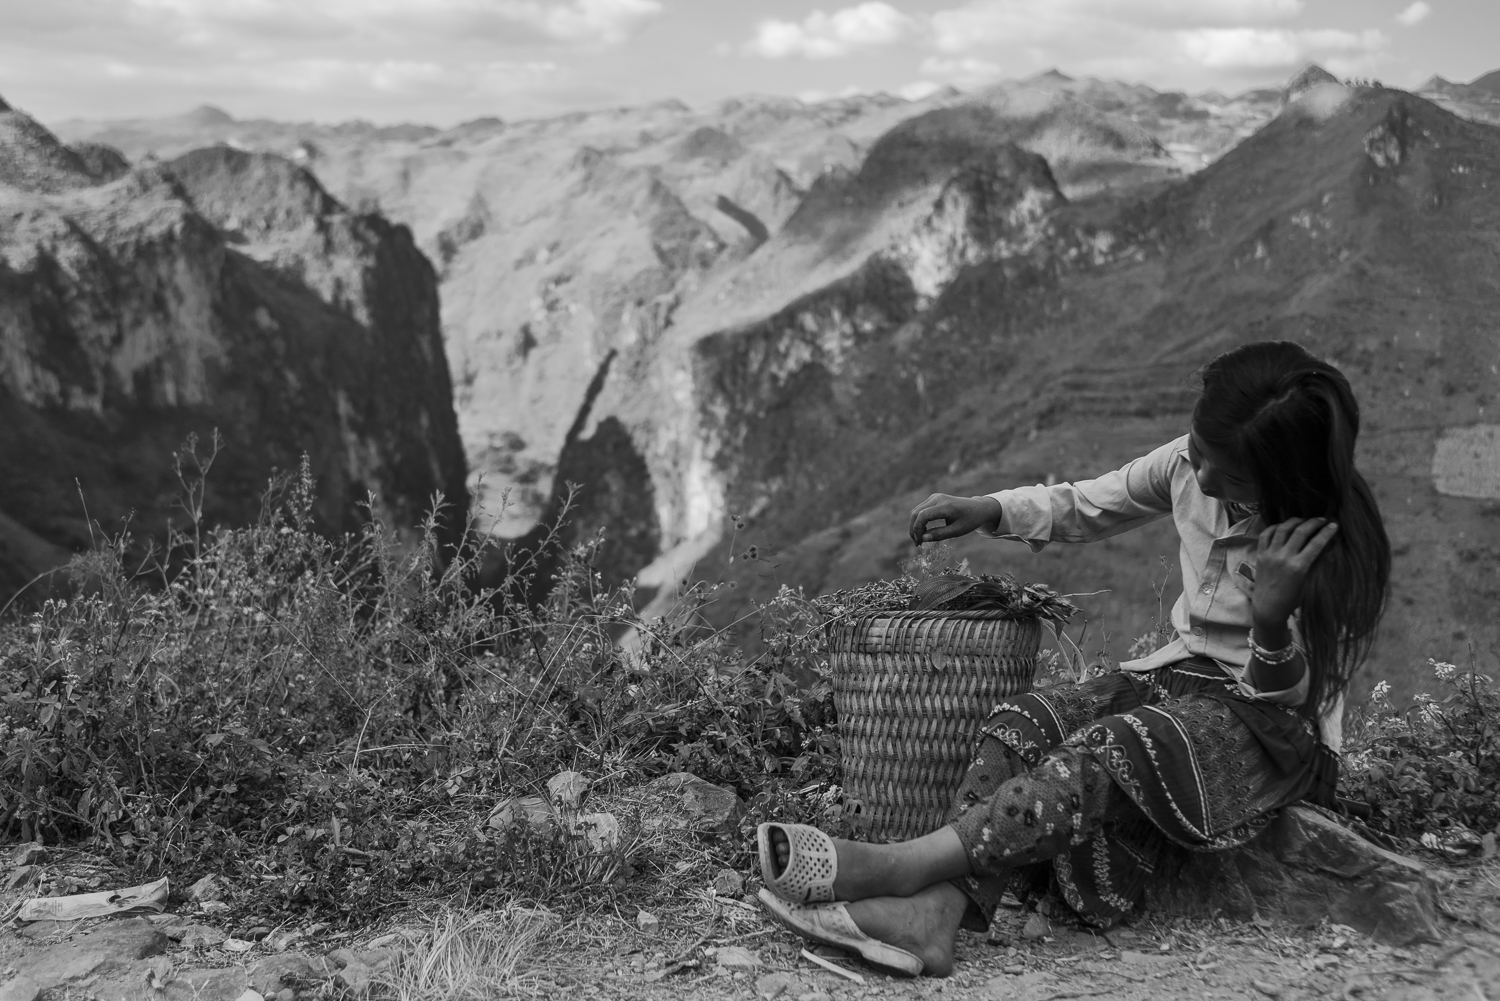 In These Mountains: Ethnic Minority Communities of the Vietnamese Highlands